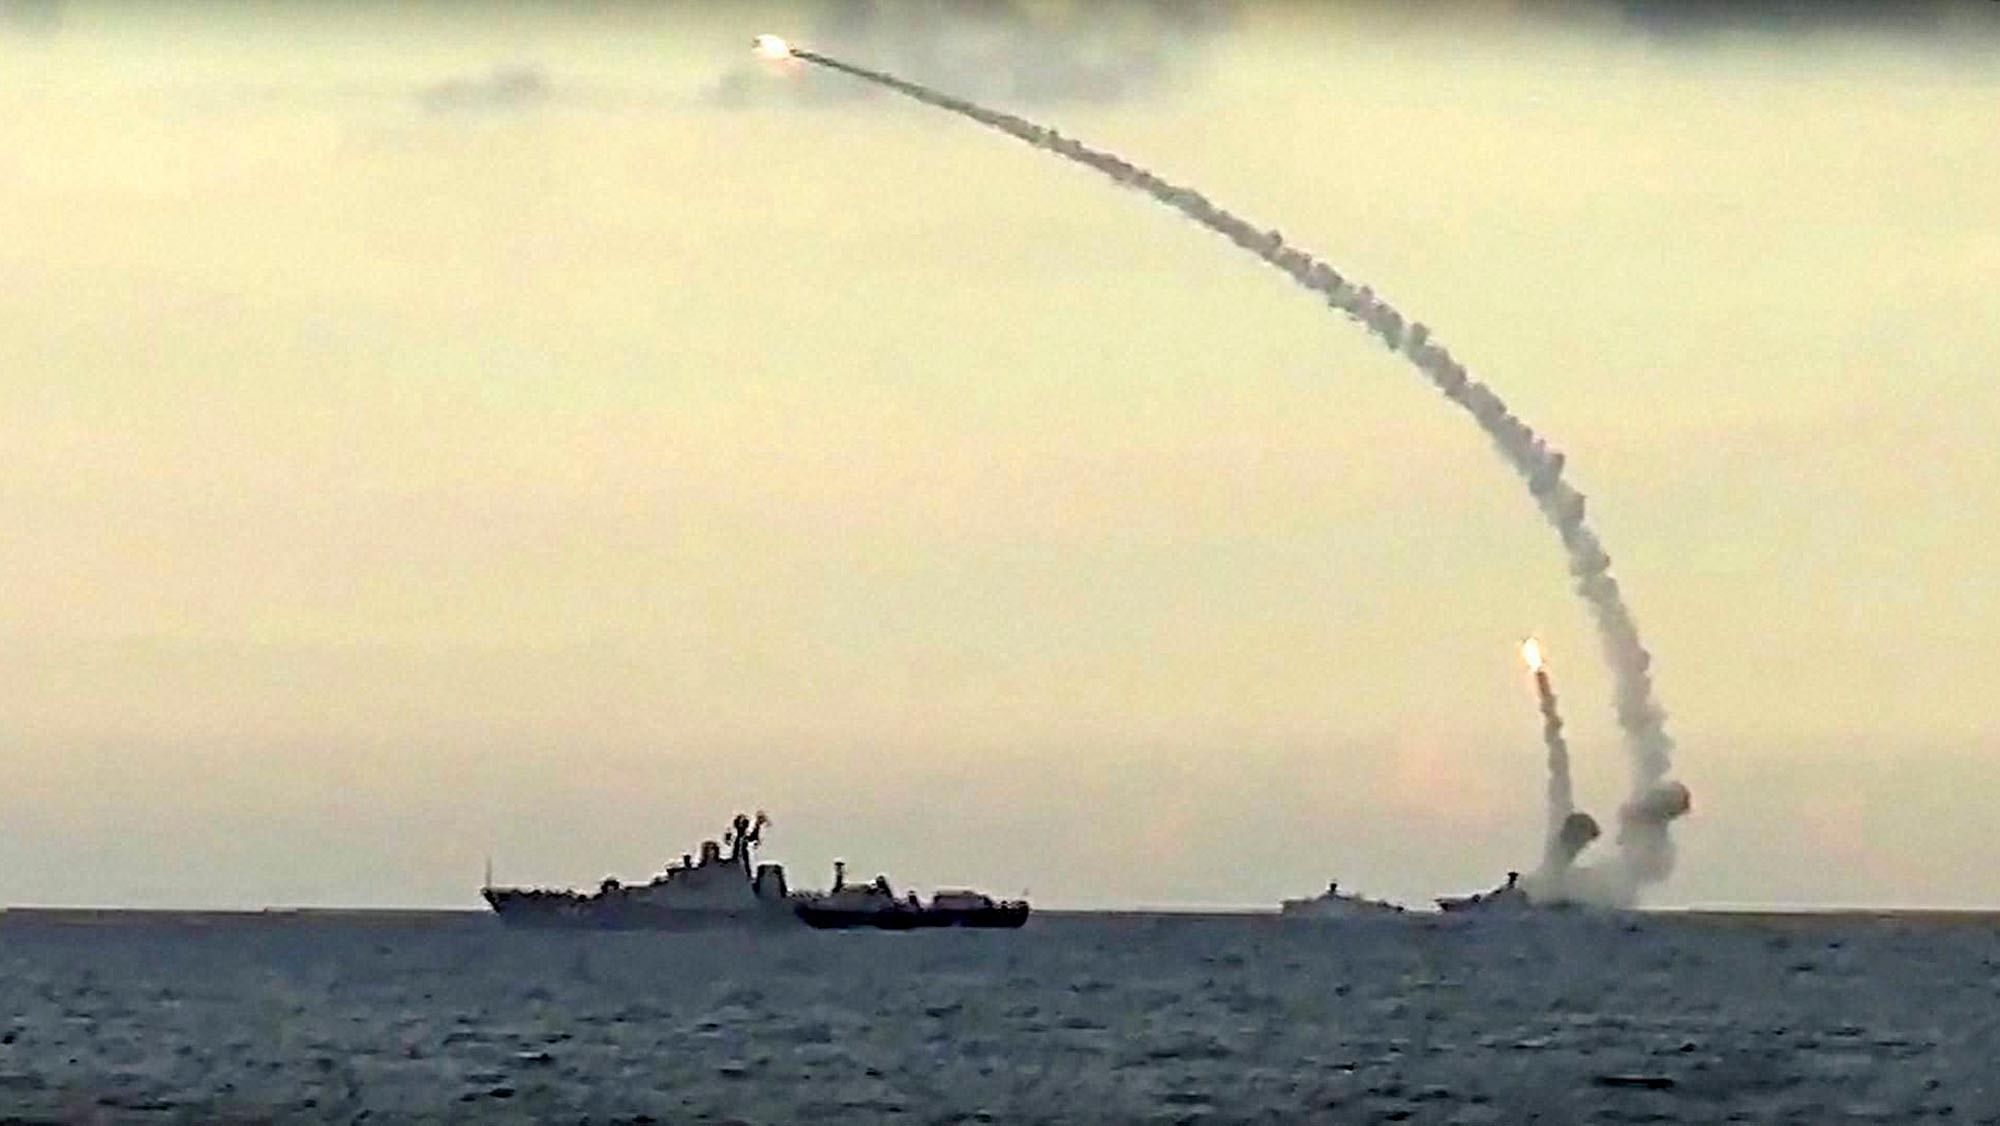 Russian Defence Ministry photo of navy ships launching cruise missiles at targets in Syria from the Caspian Sea on 20 November 2015. (Photo: PTI)